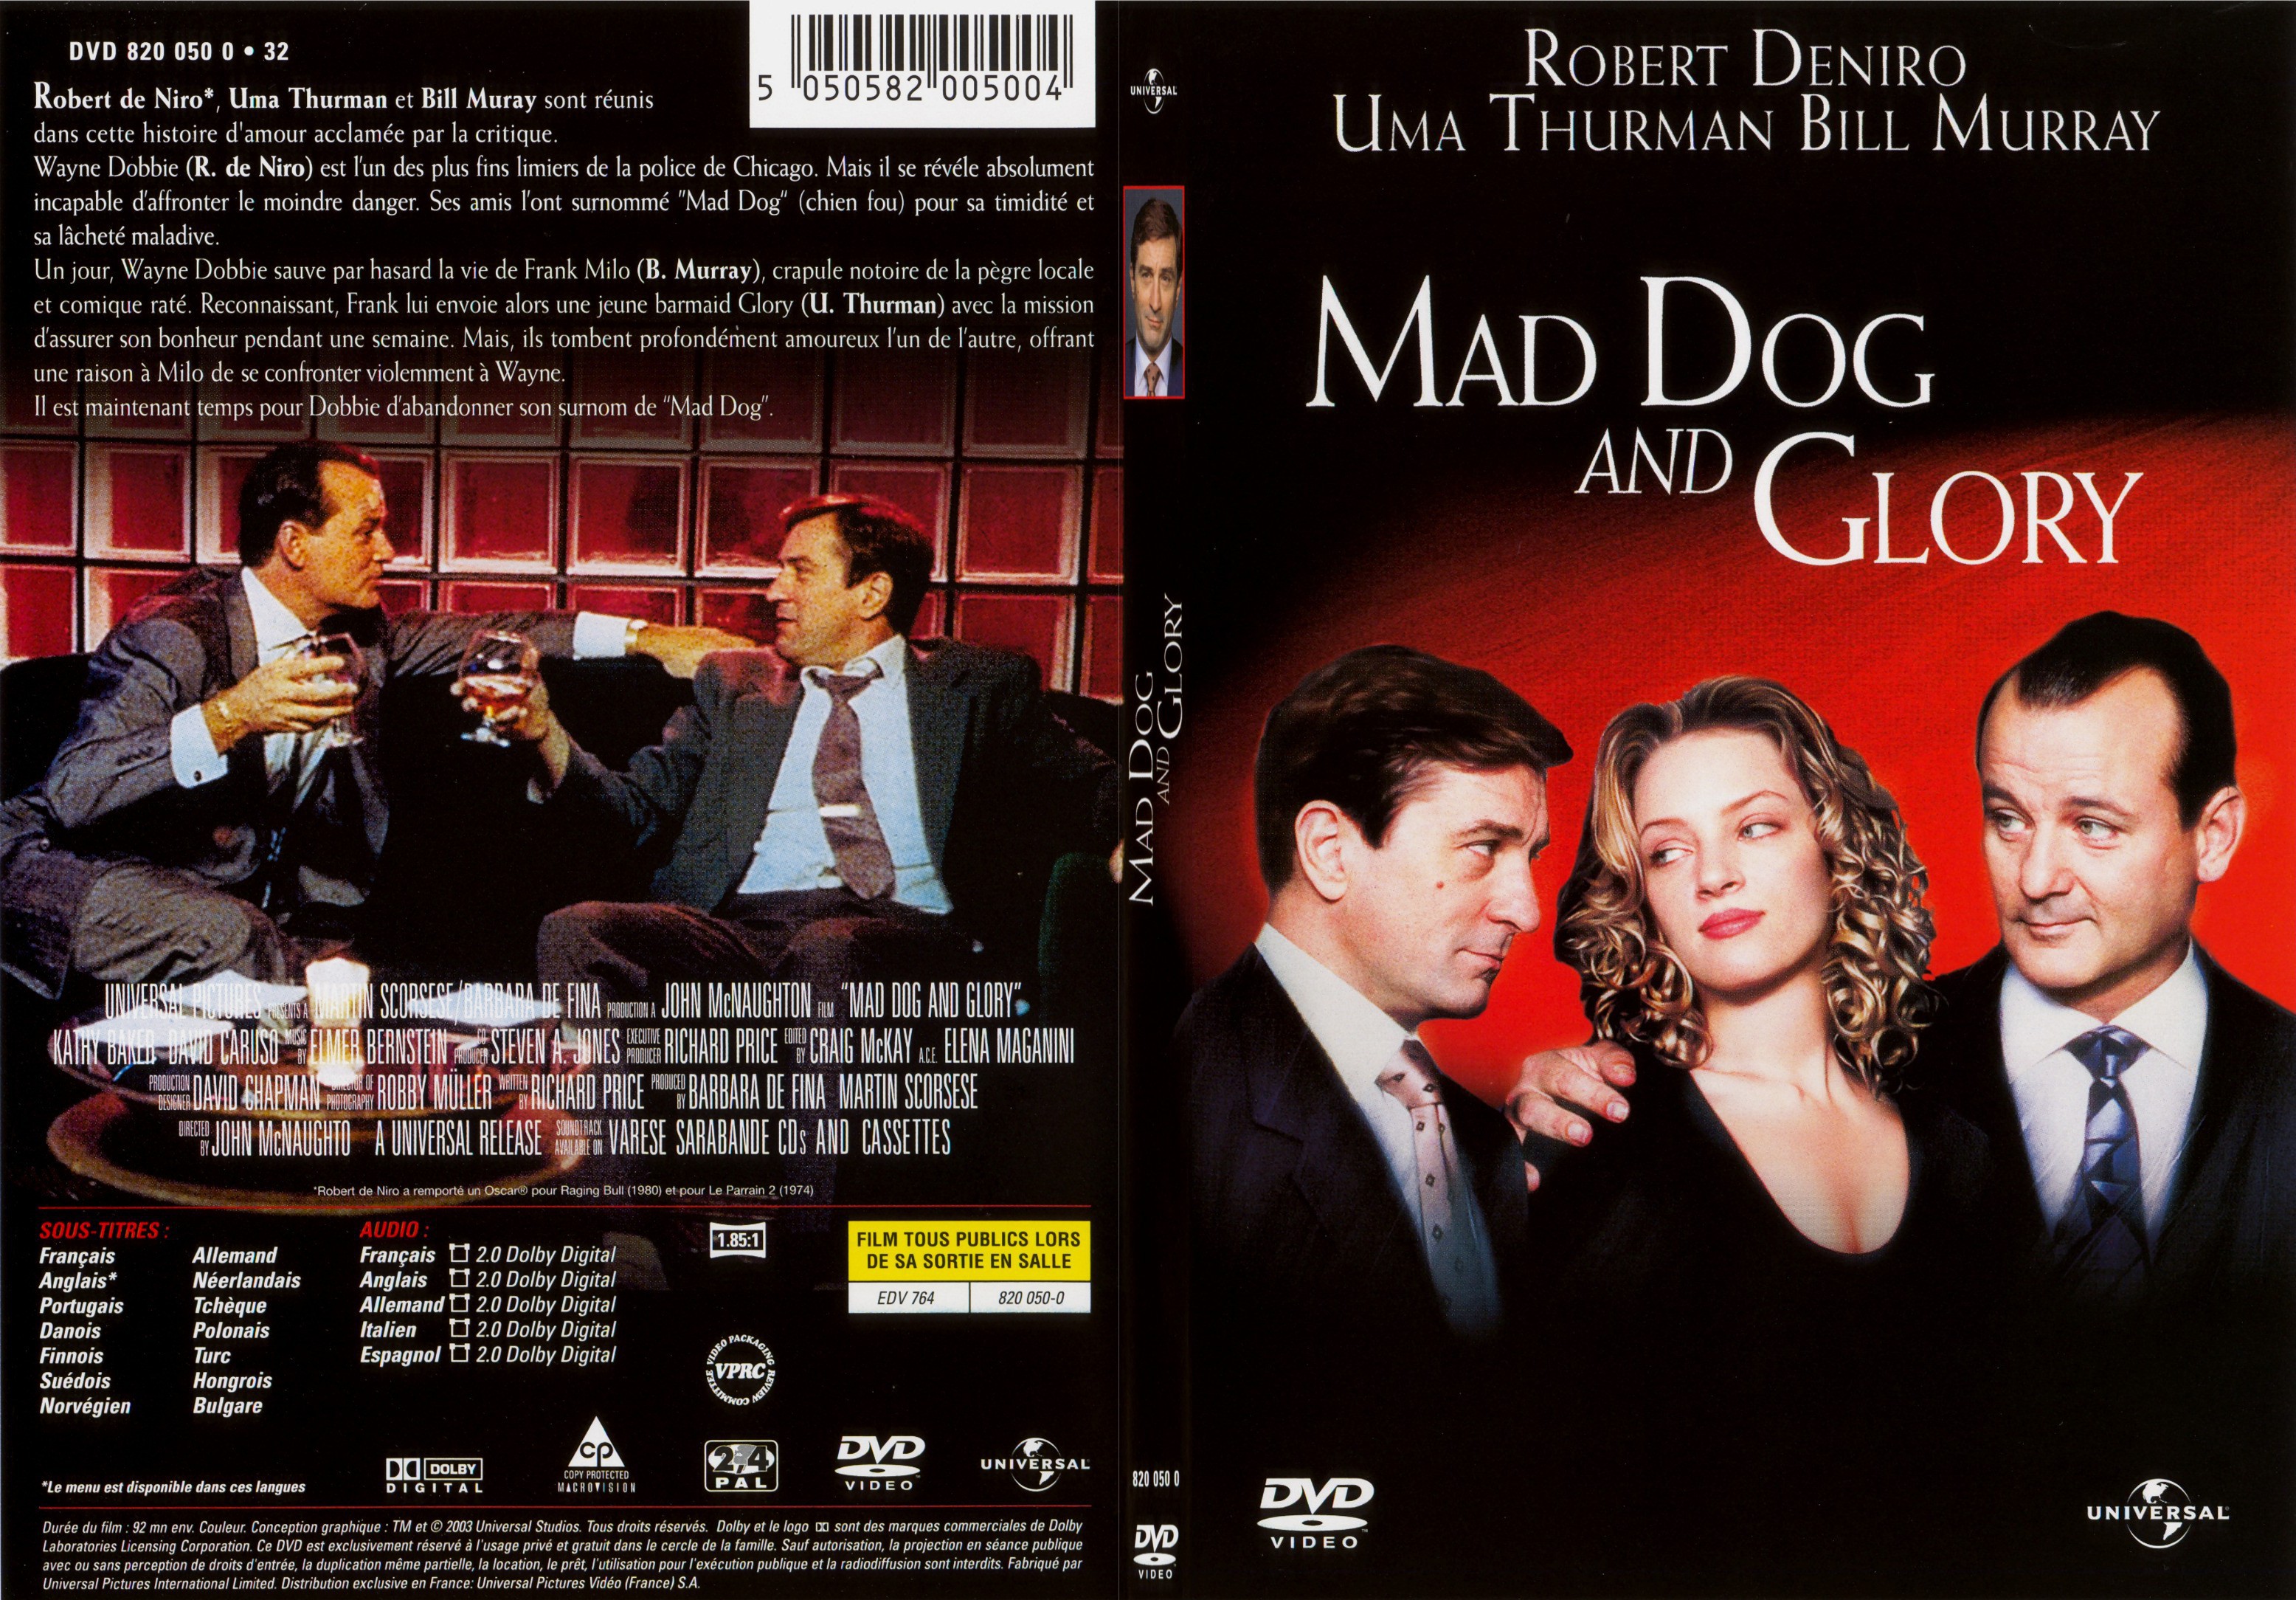 Jaquette DVD Mad dog and glory - SLIM